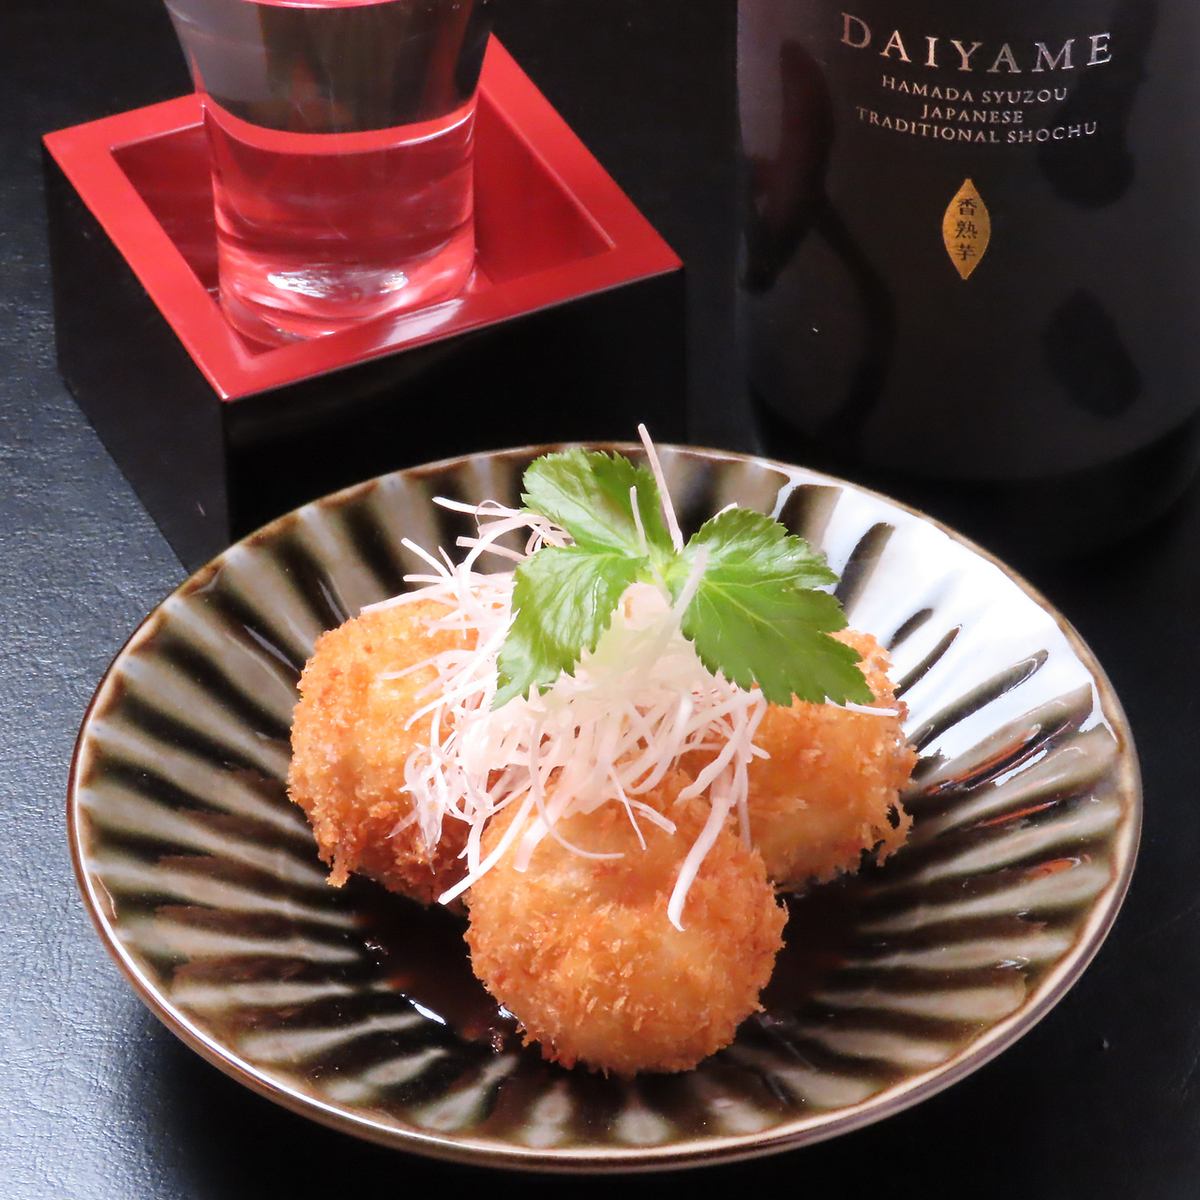 Enjoy our signature dishes made with ingredients from Kagoshima